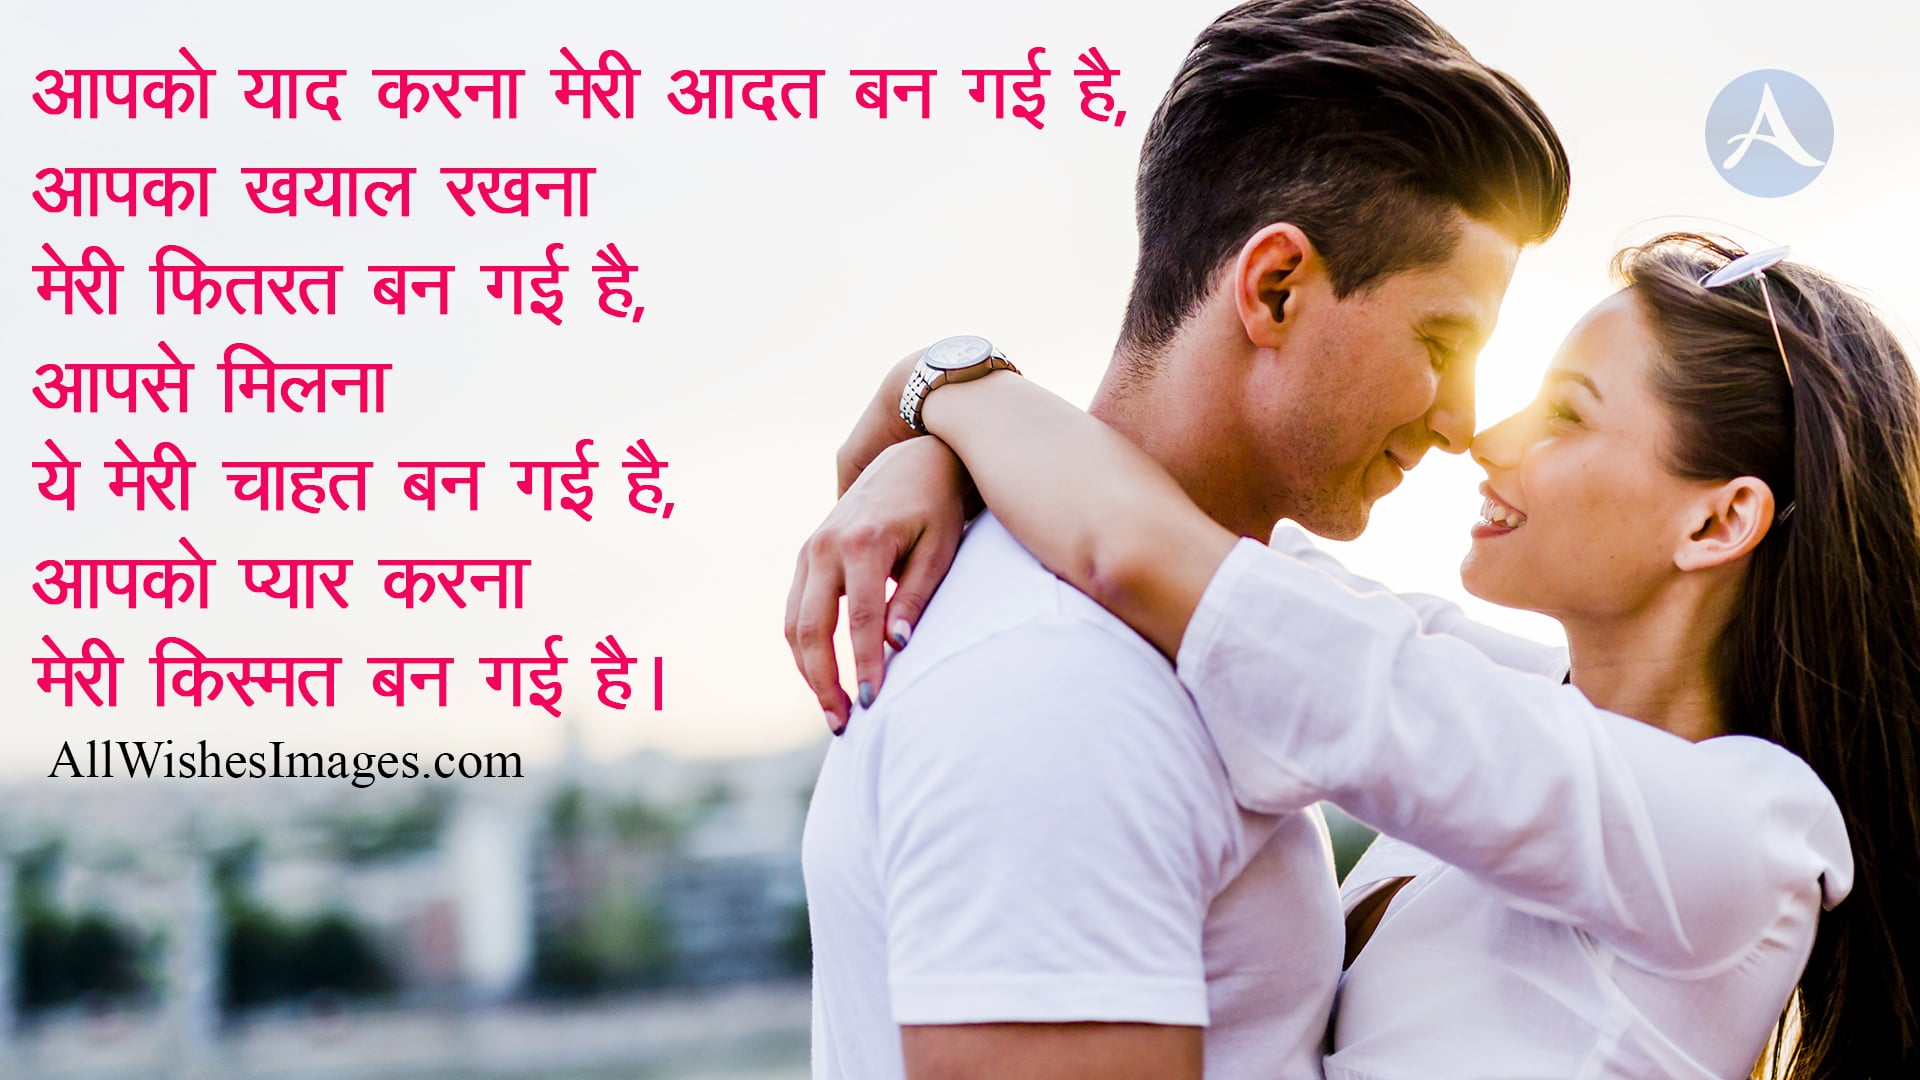 Love Shayari For Him With Images - All Wishes Images - Images for WhatsApp